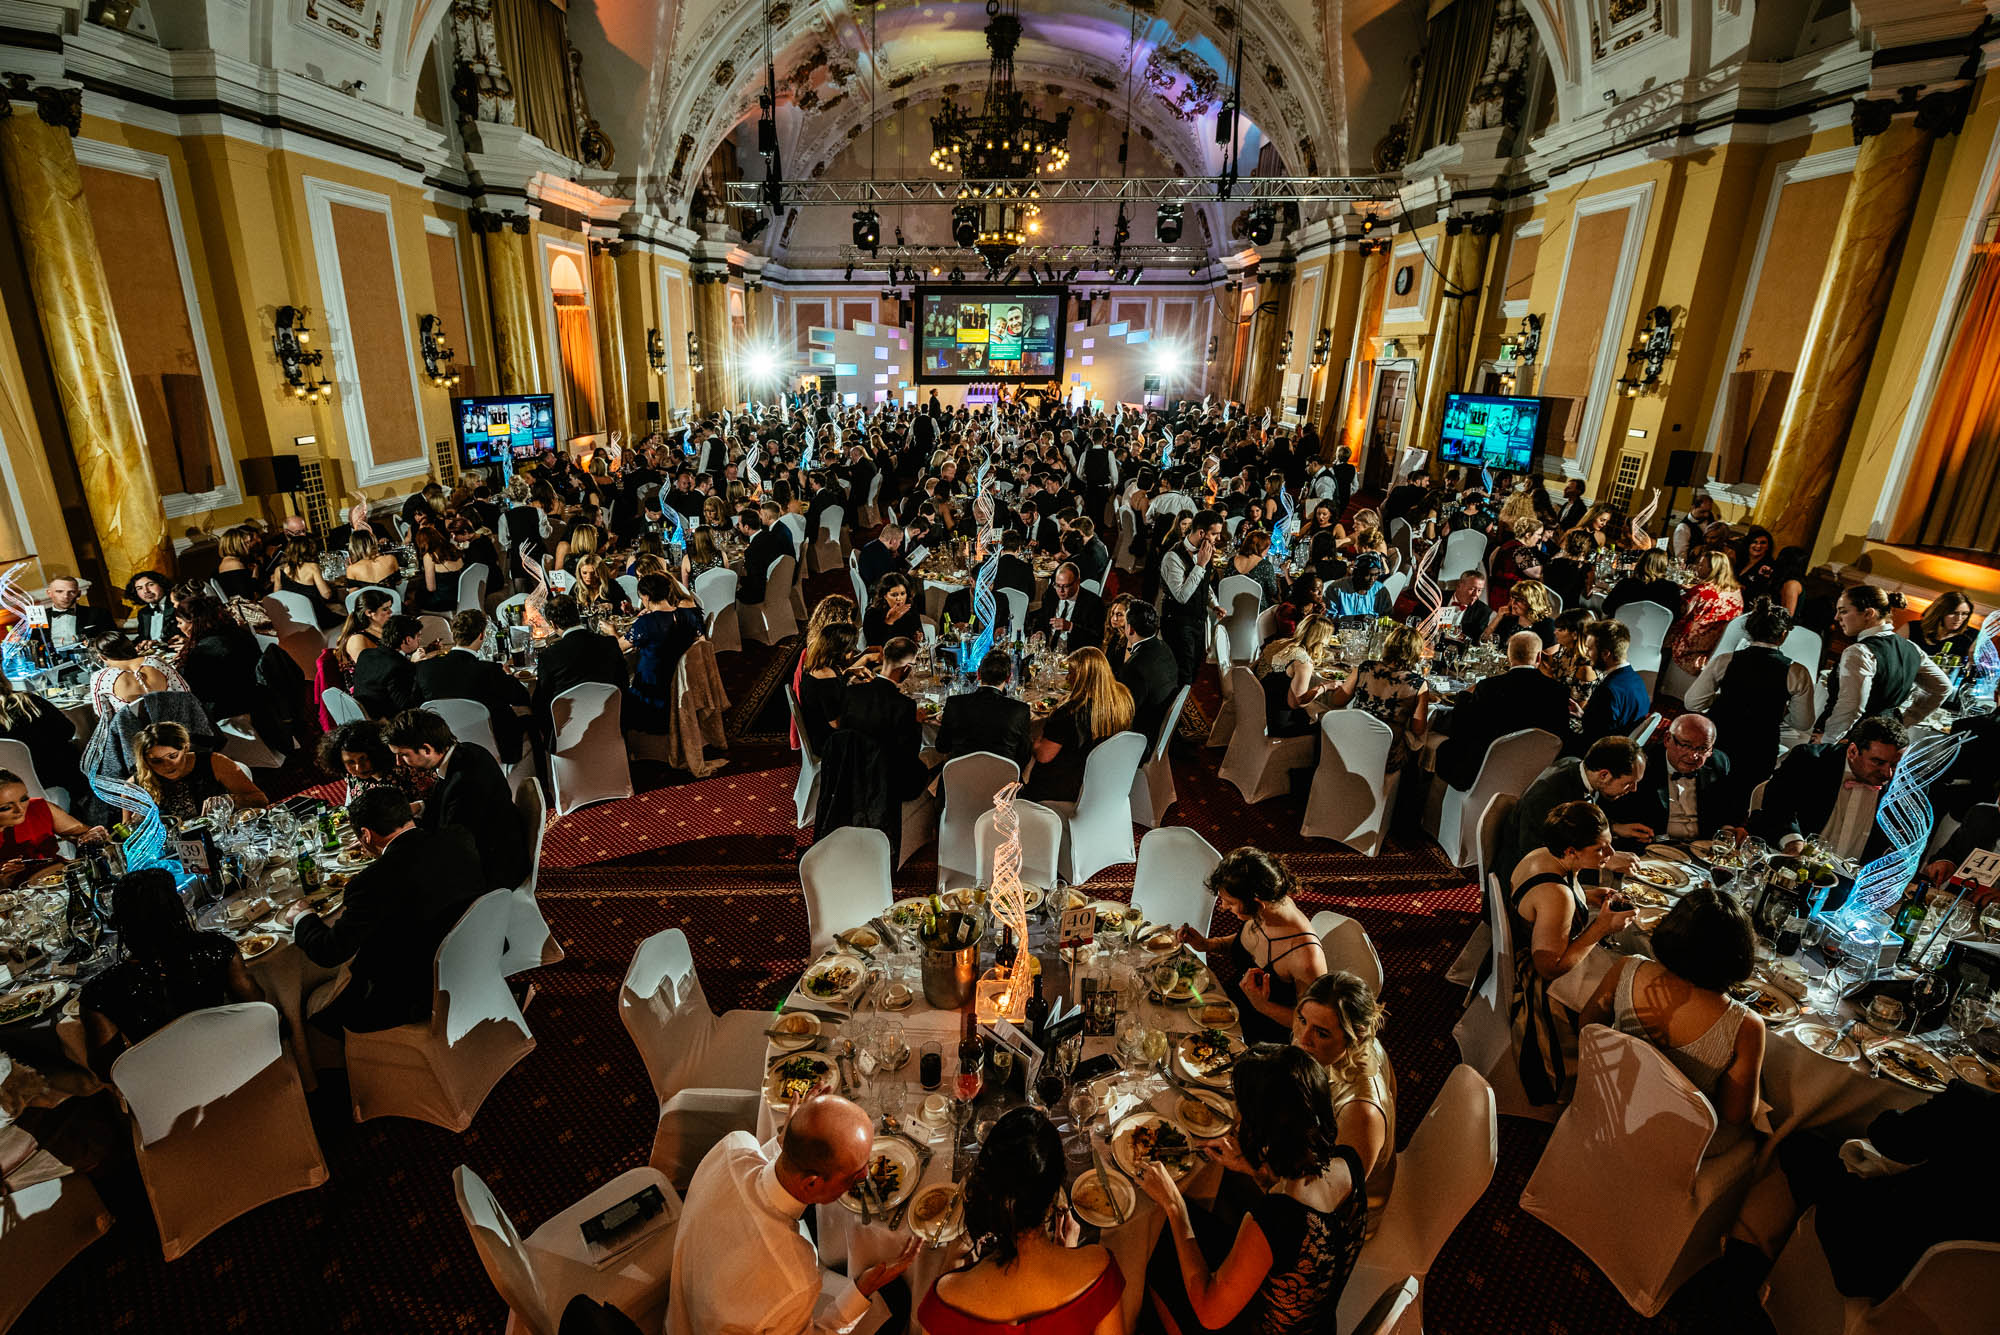 A photo of the interior of the City Hall in Cardiff during the cardiff life awards 2017